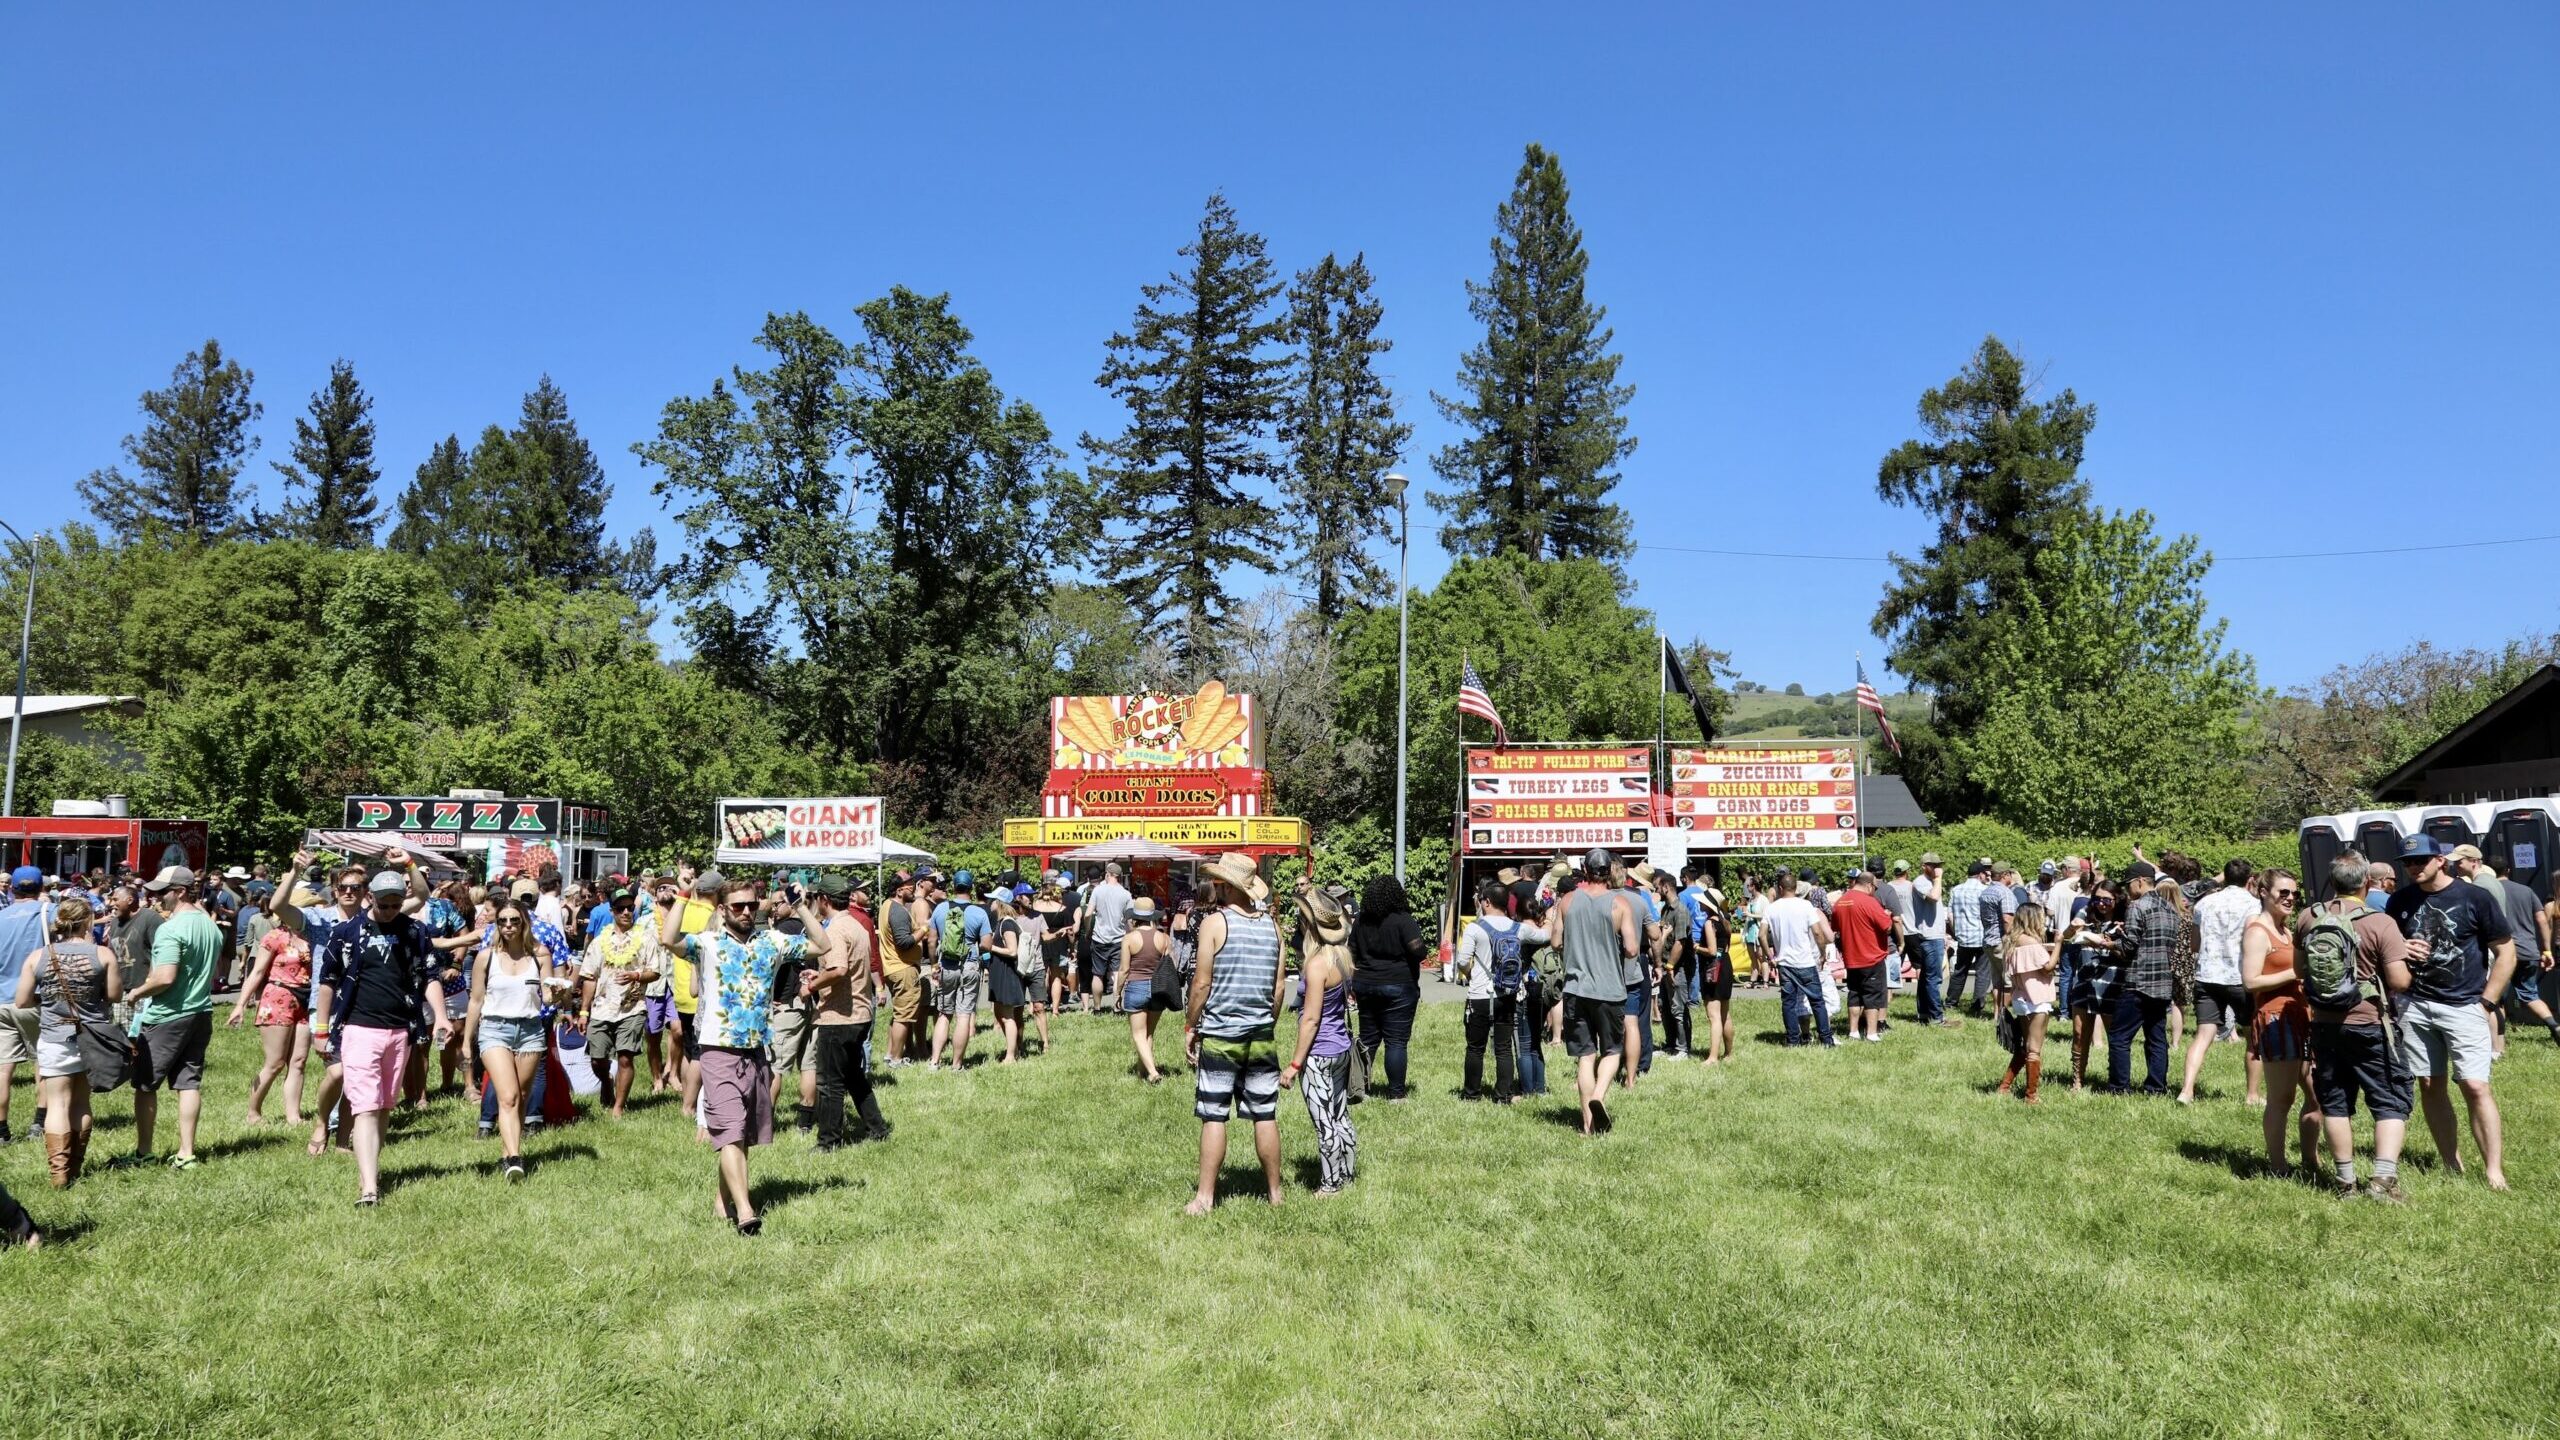 Boonville Beer Festival 2023 Dates Announced Anderson Valley Brewing